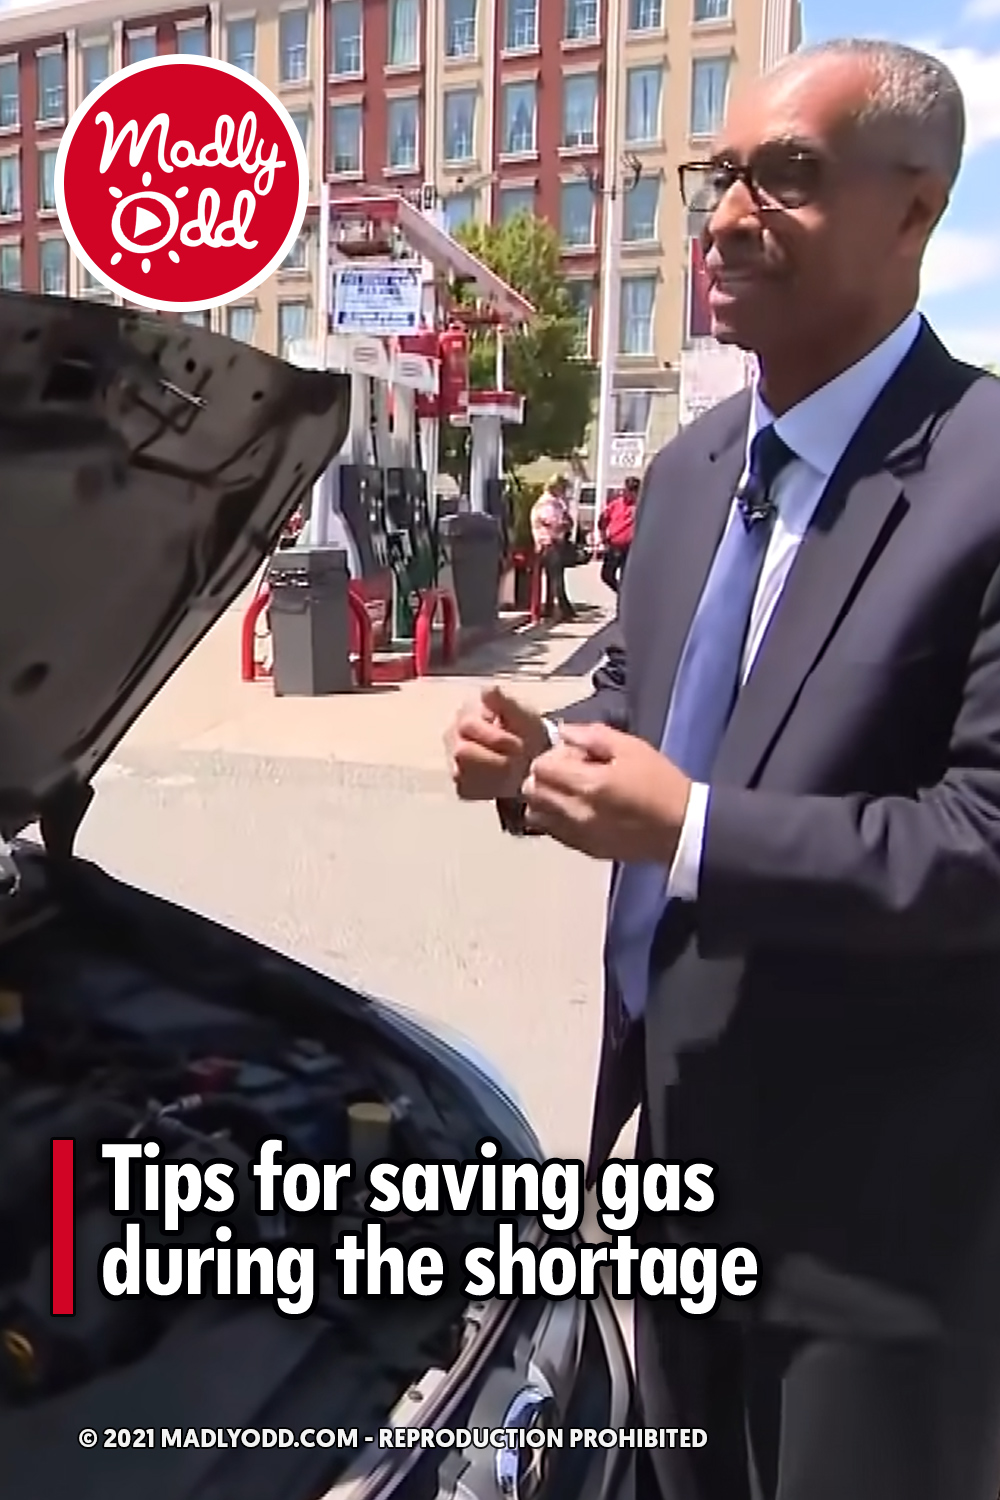 Tips for saving gas during the shortage